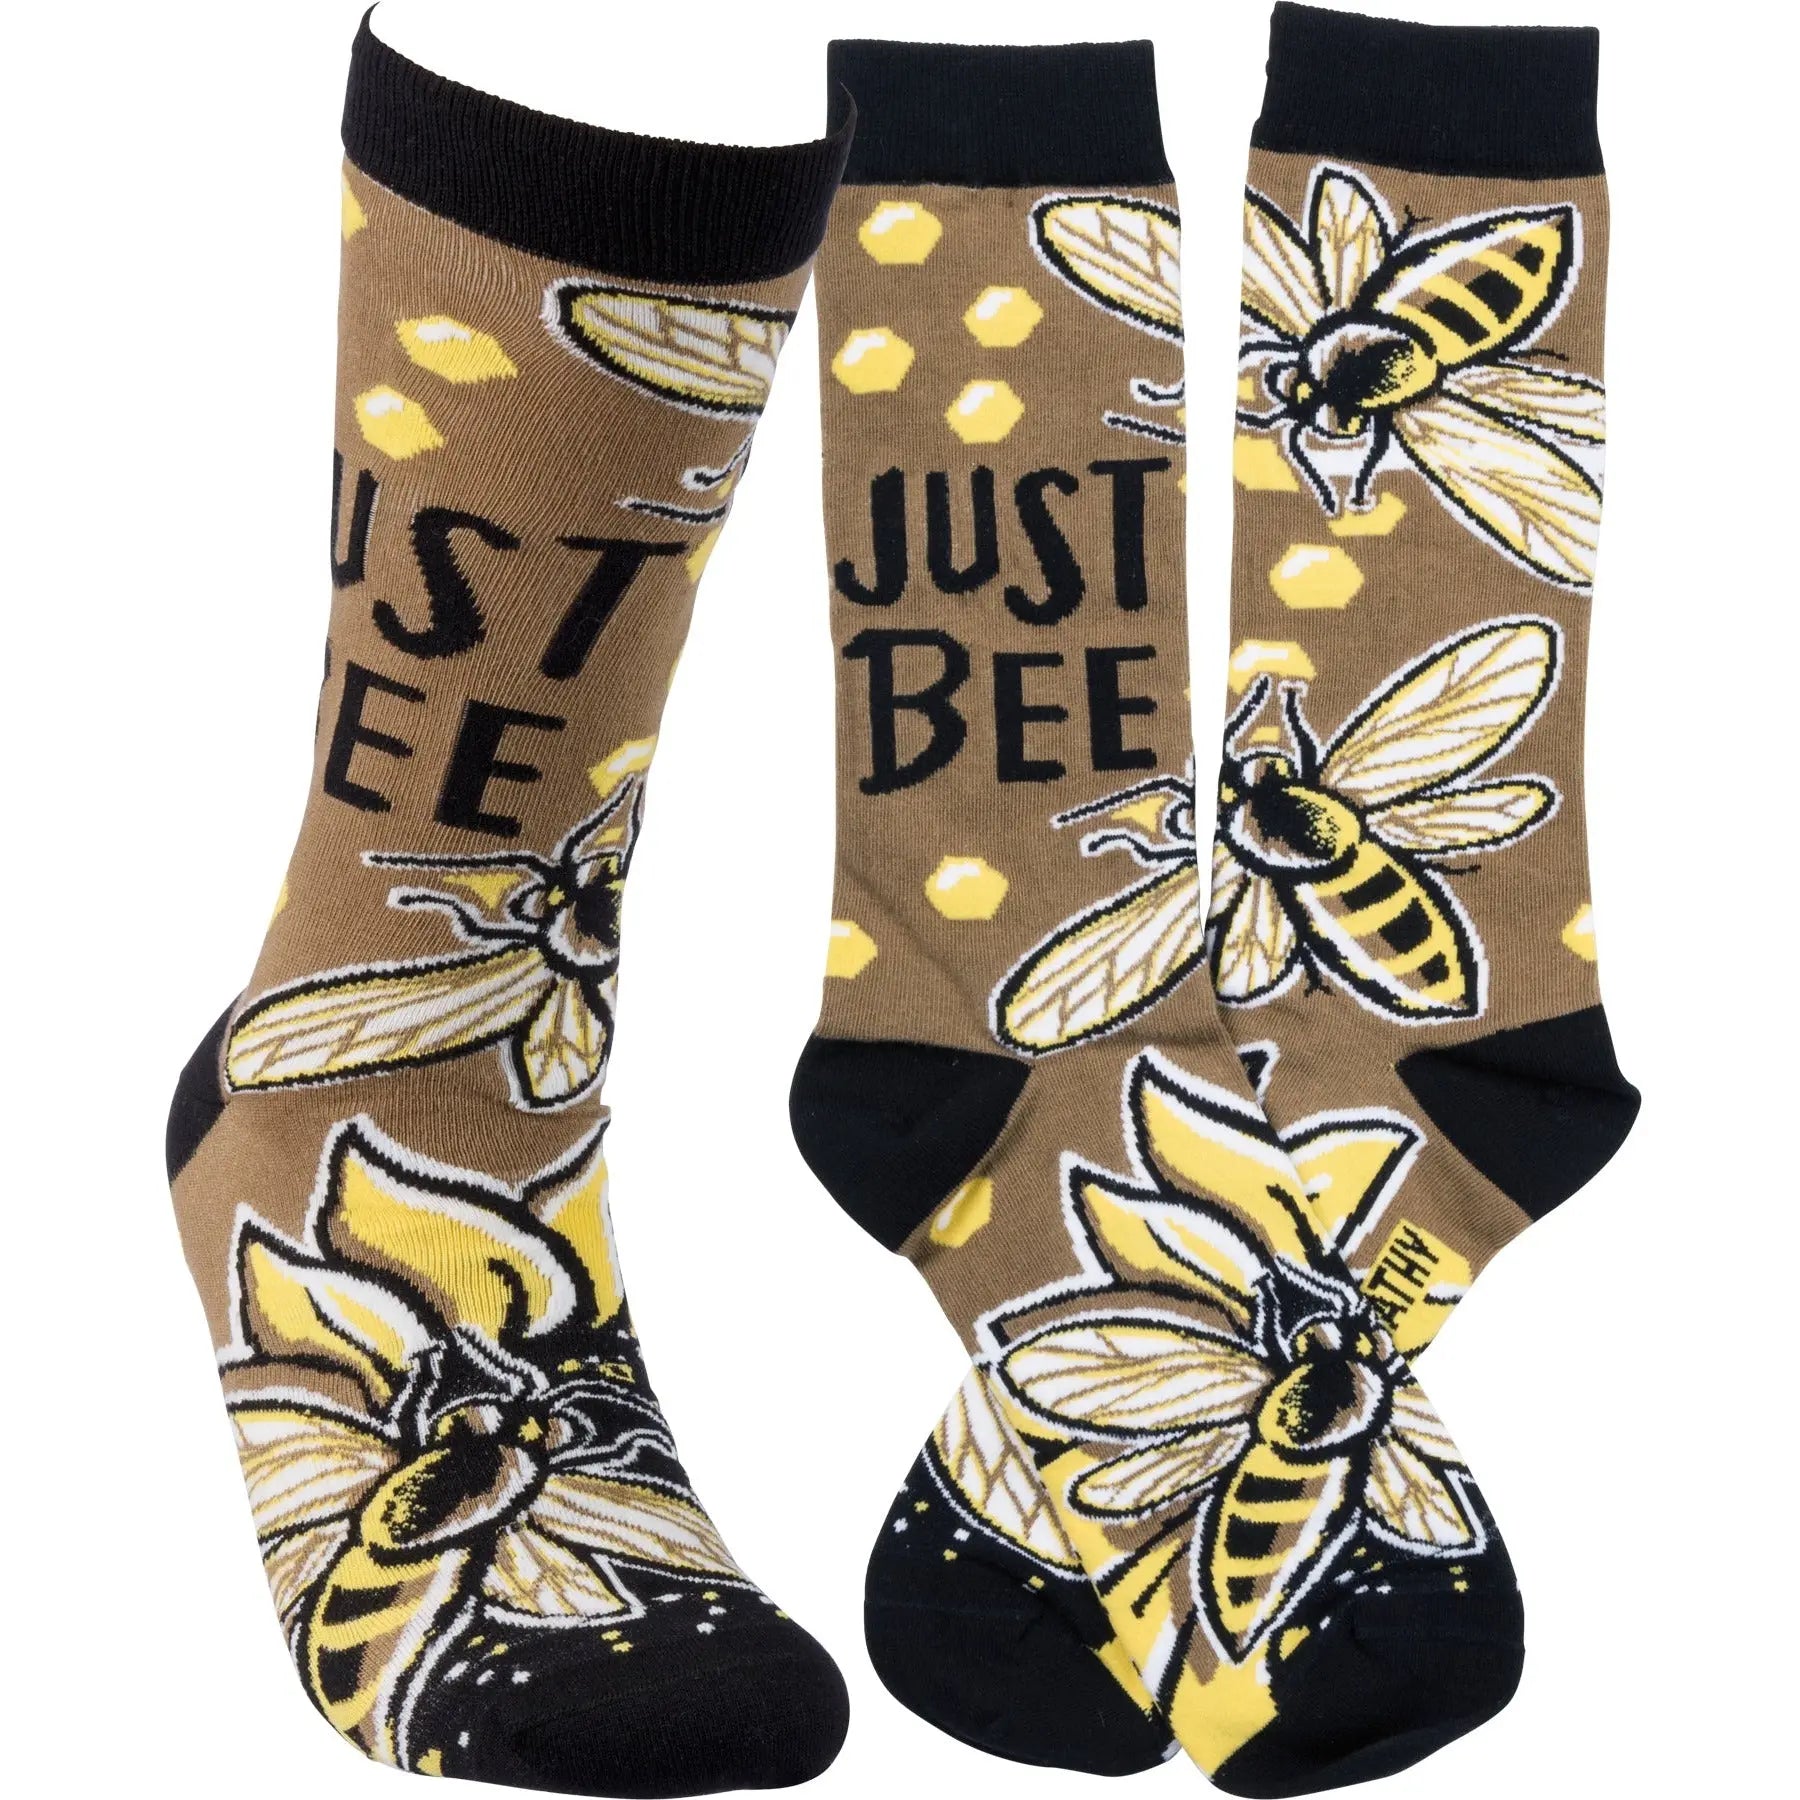 Primitives By Kathy - "Just Bee" Socks PRIMITIVES BY KATHY